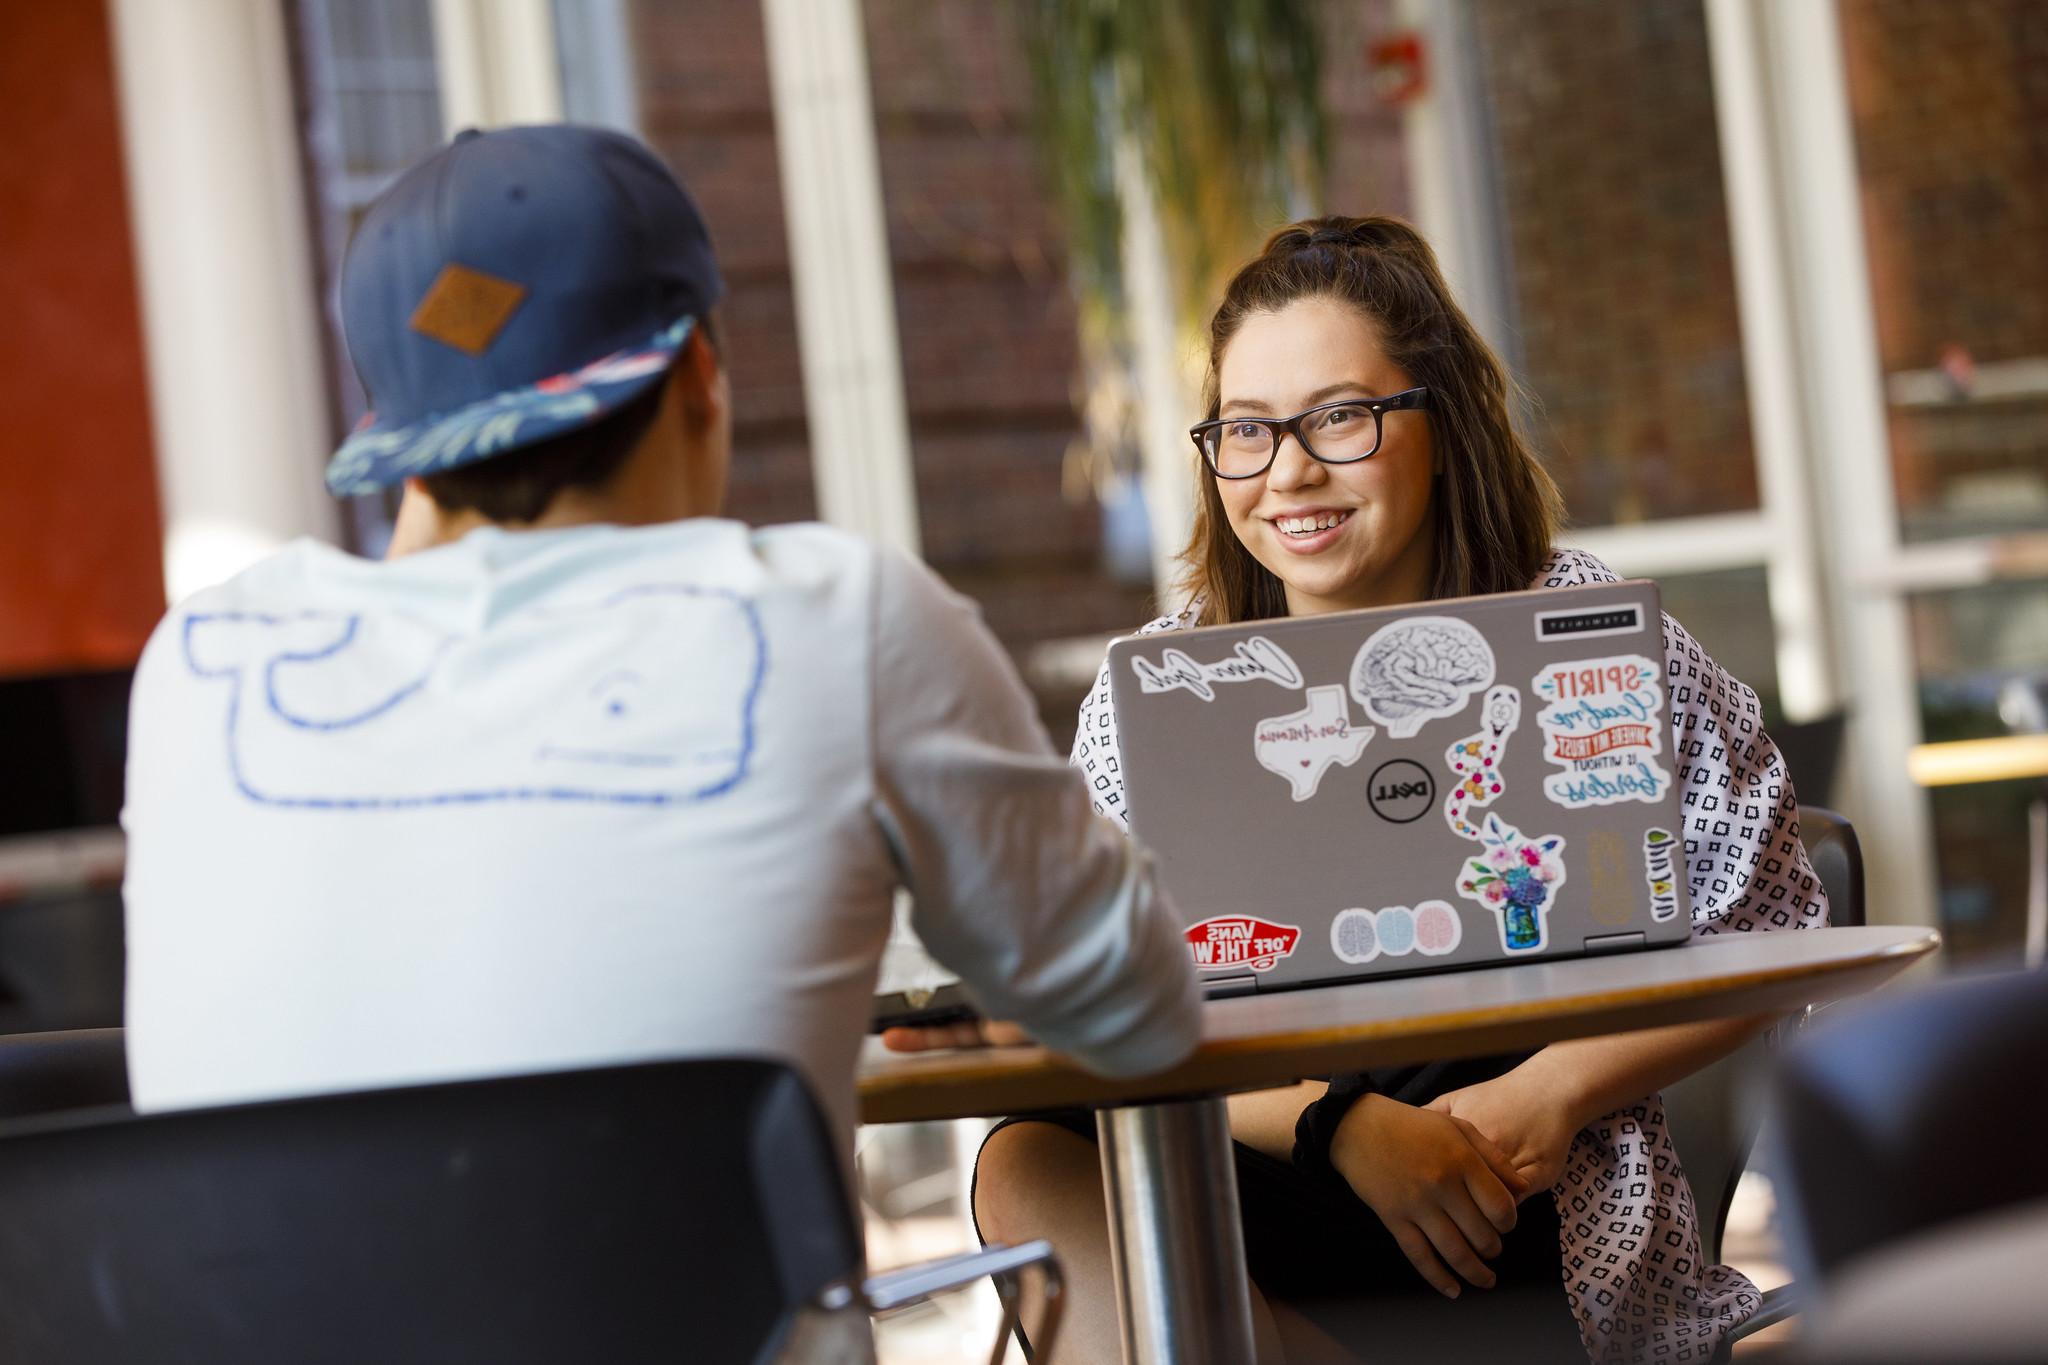 Students Talking at a table with computer in front of them